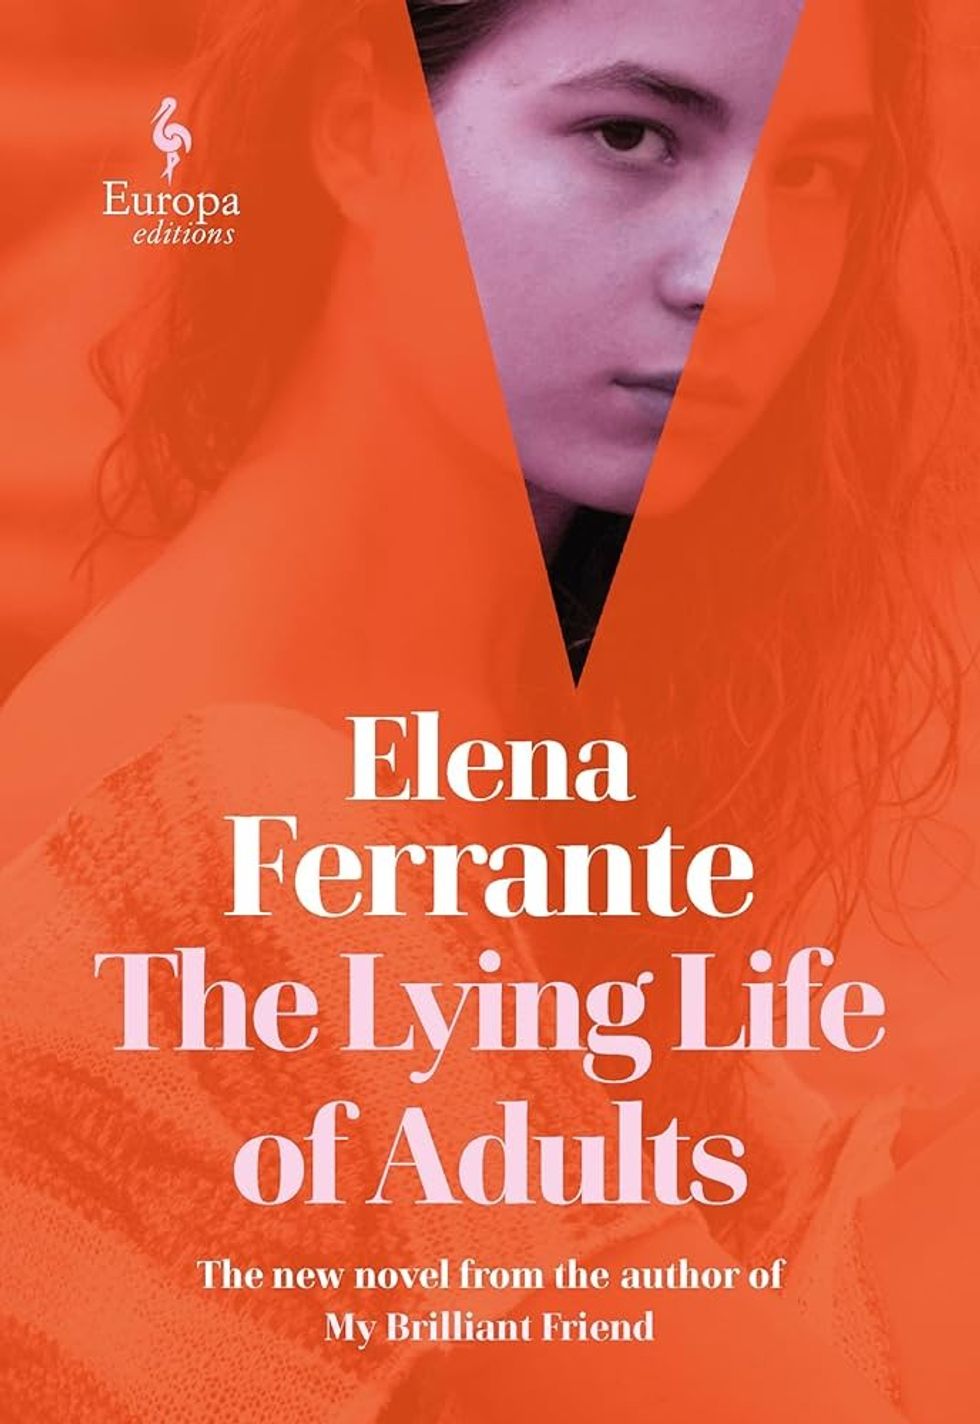 The Lying Lives of Adults by Elena Ferrante